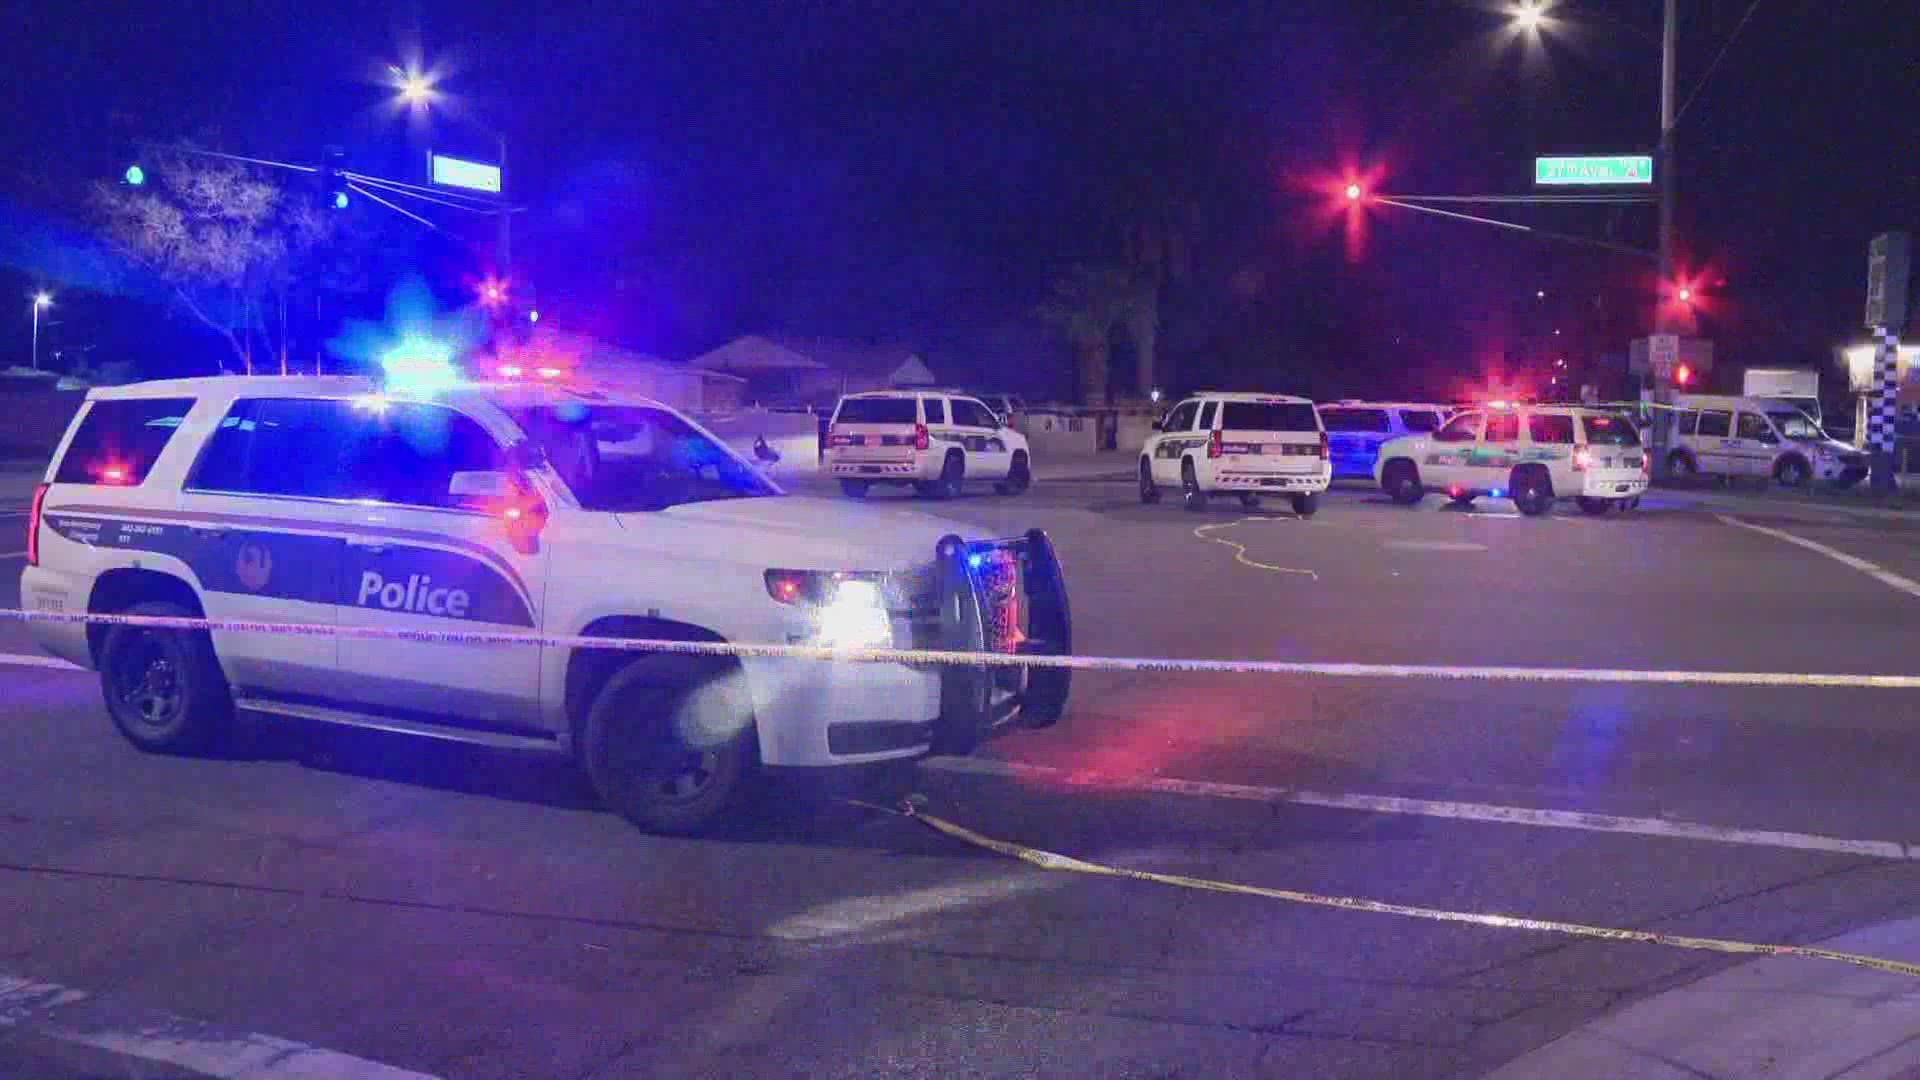 A woman is dead after a shooting in Phoenix near 27th and Missouri avenues. She has been identified as 42-year-old Teana Yameka Pruitt.